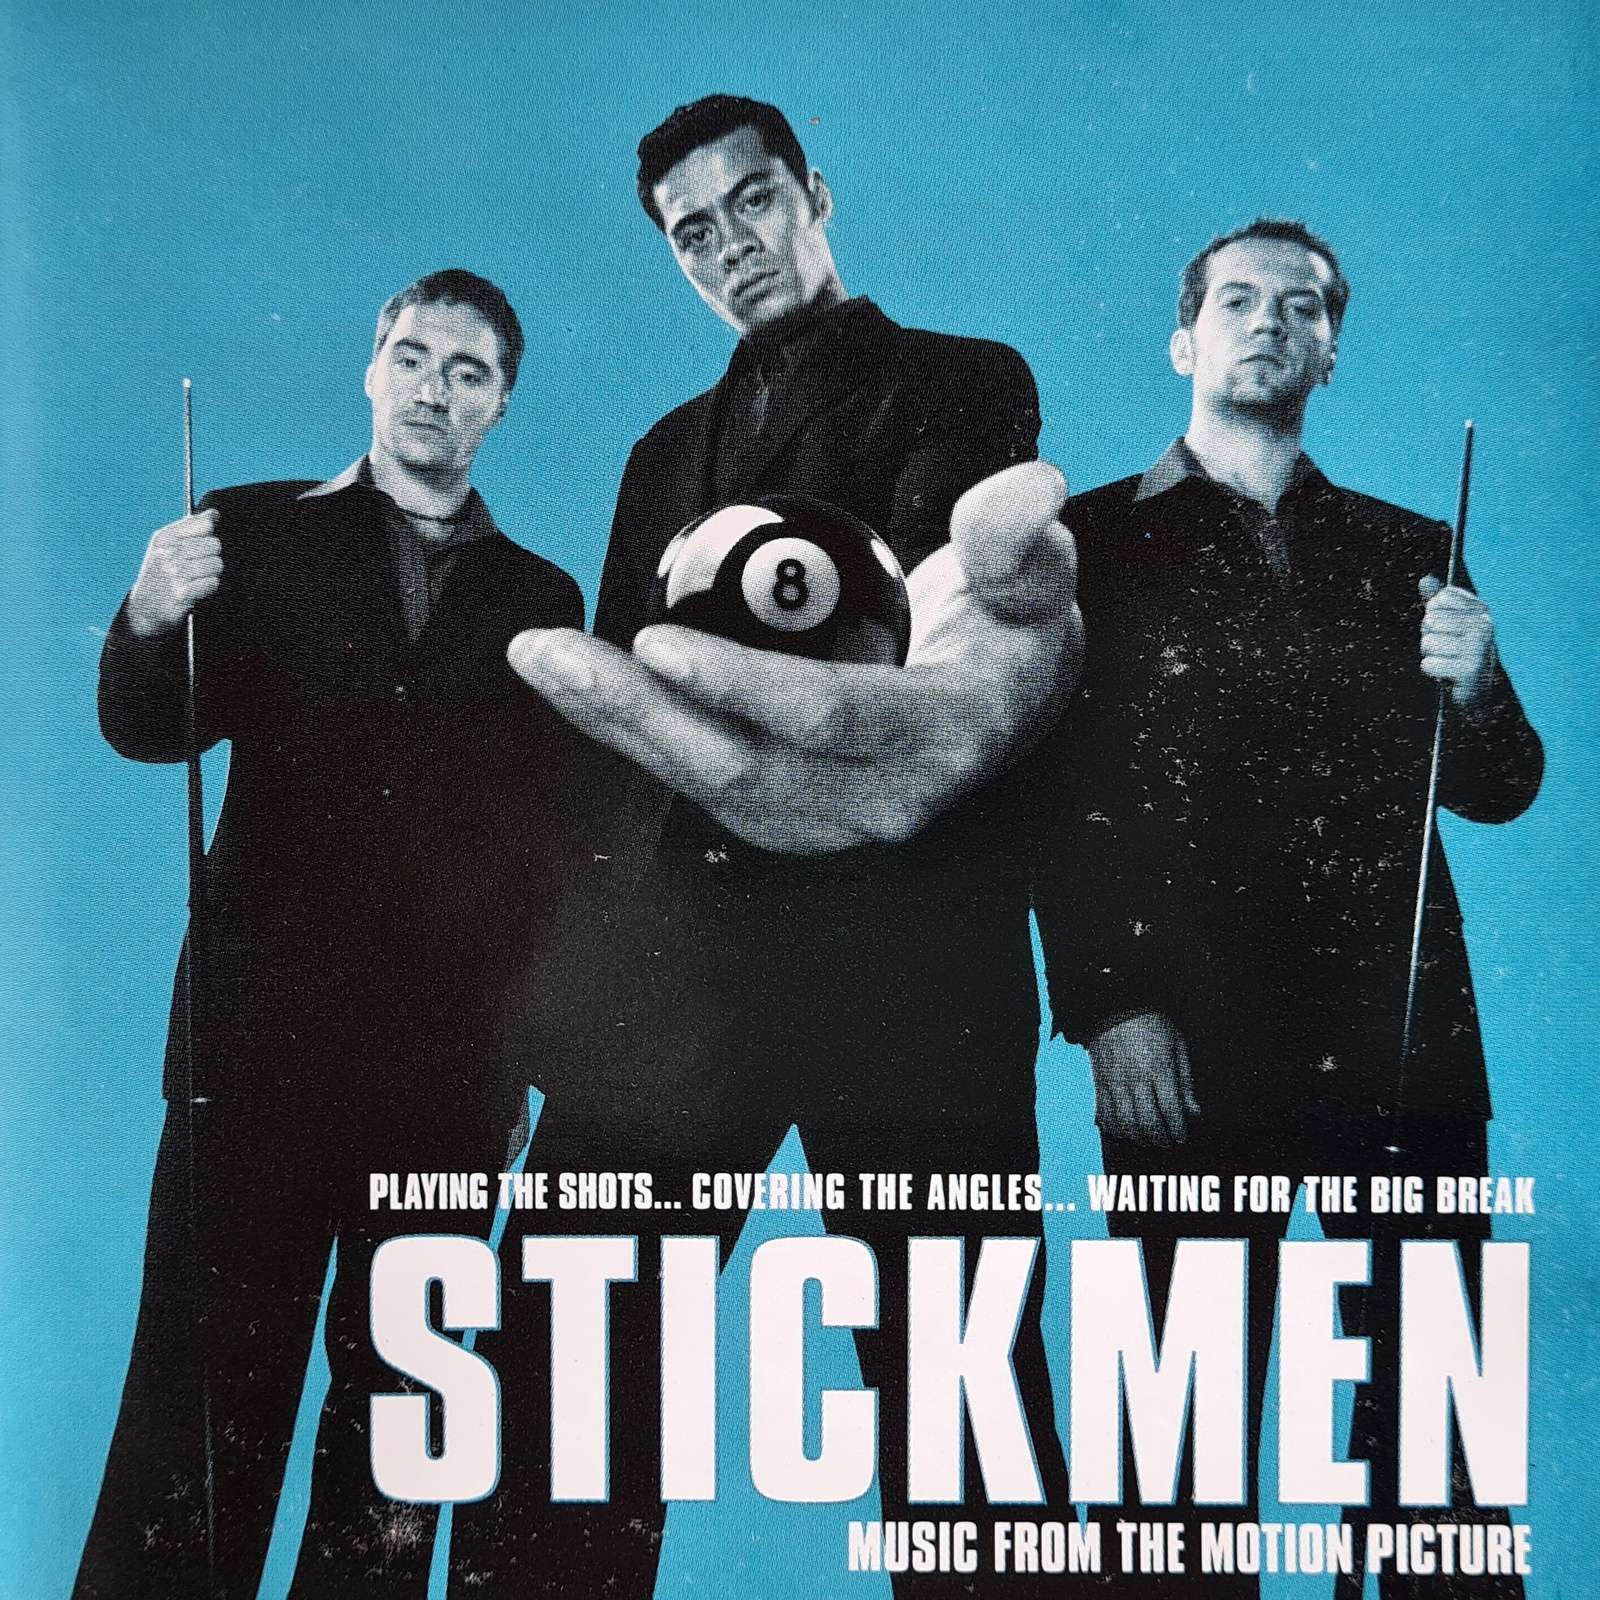 Stickmen - Music from the Motion Picture (CD)